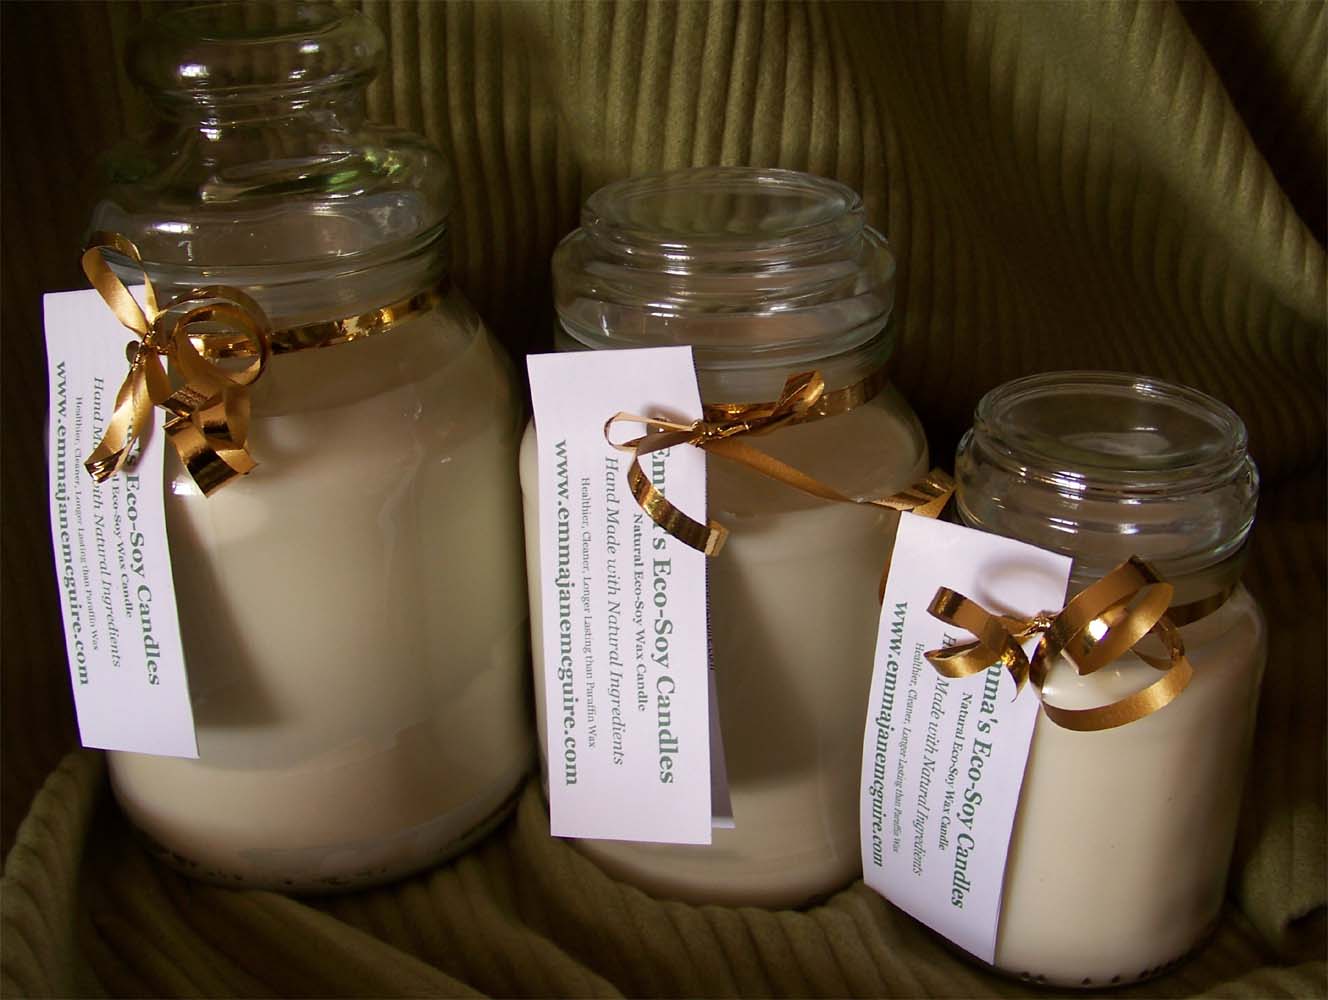 Emma's Eco-Soy Candles x3 jar candles